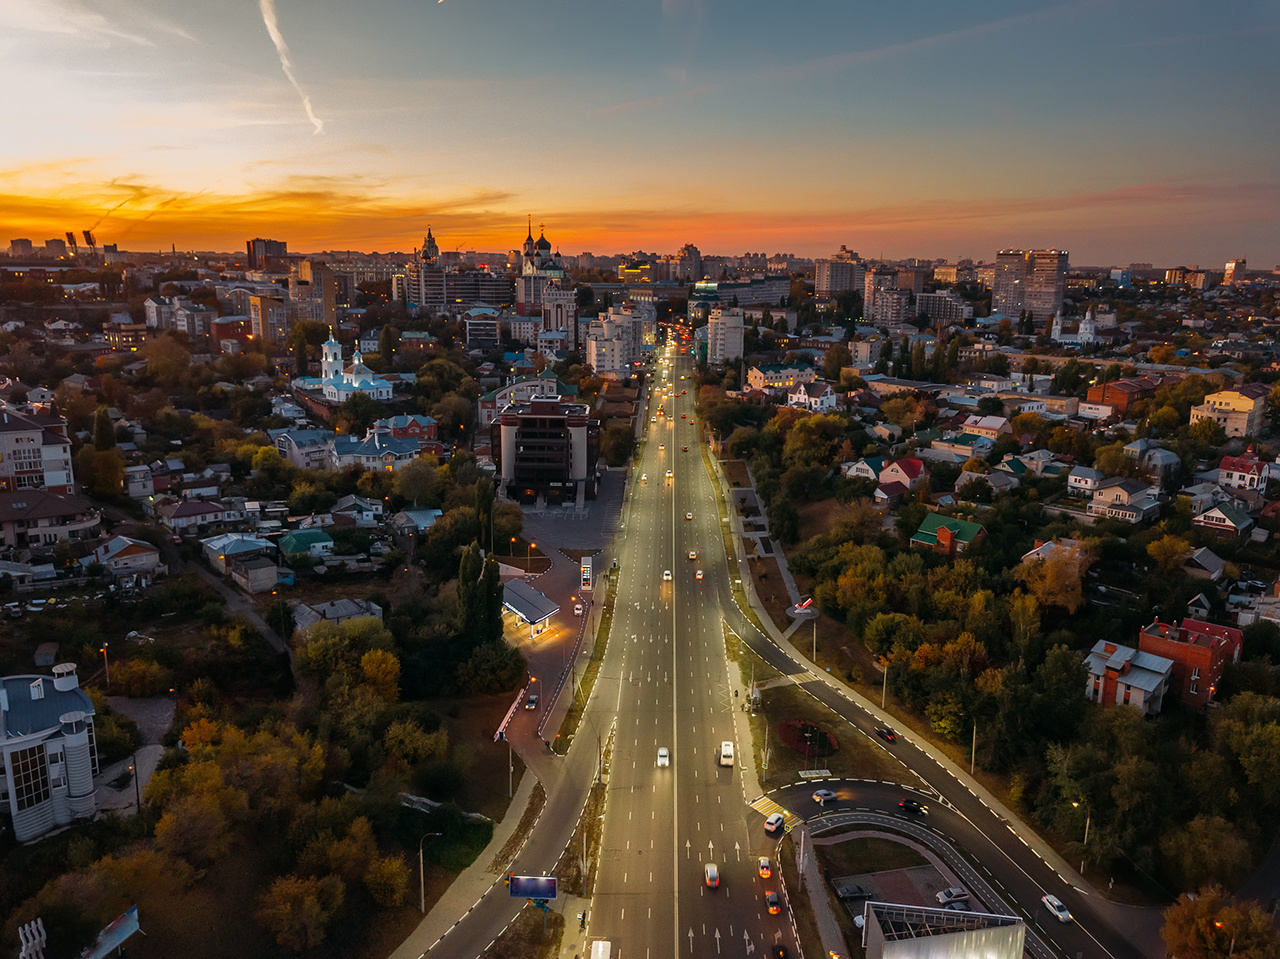 Night Voronezh, aerial view of city with illuminated road.